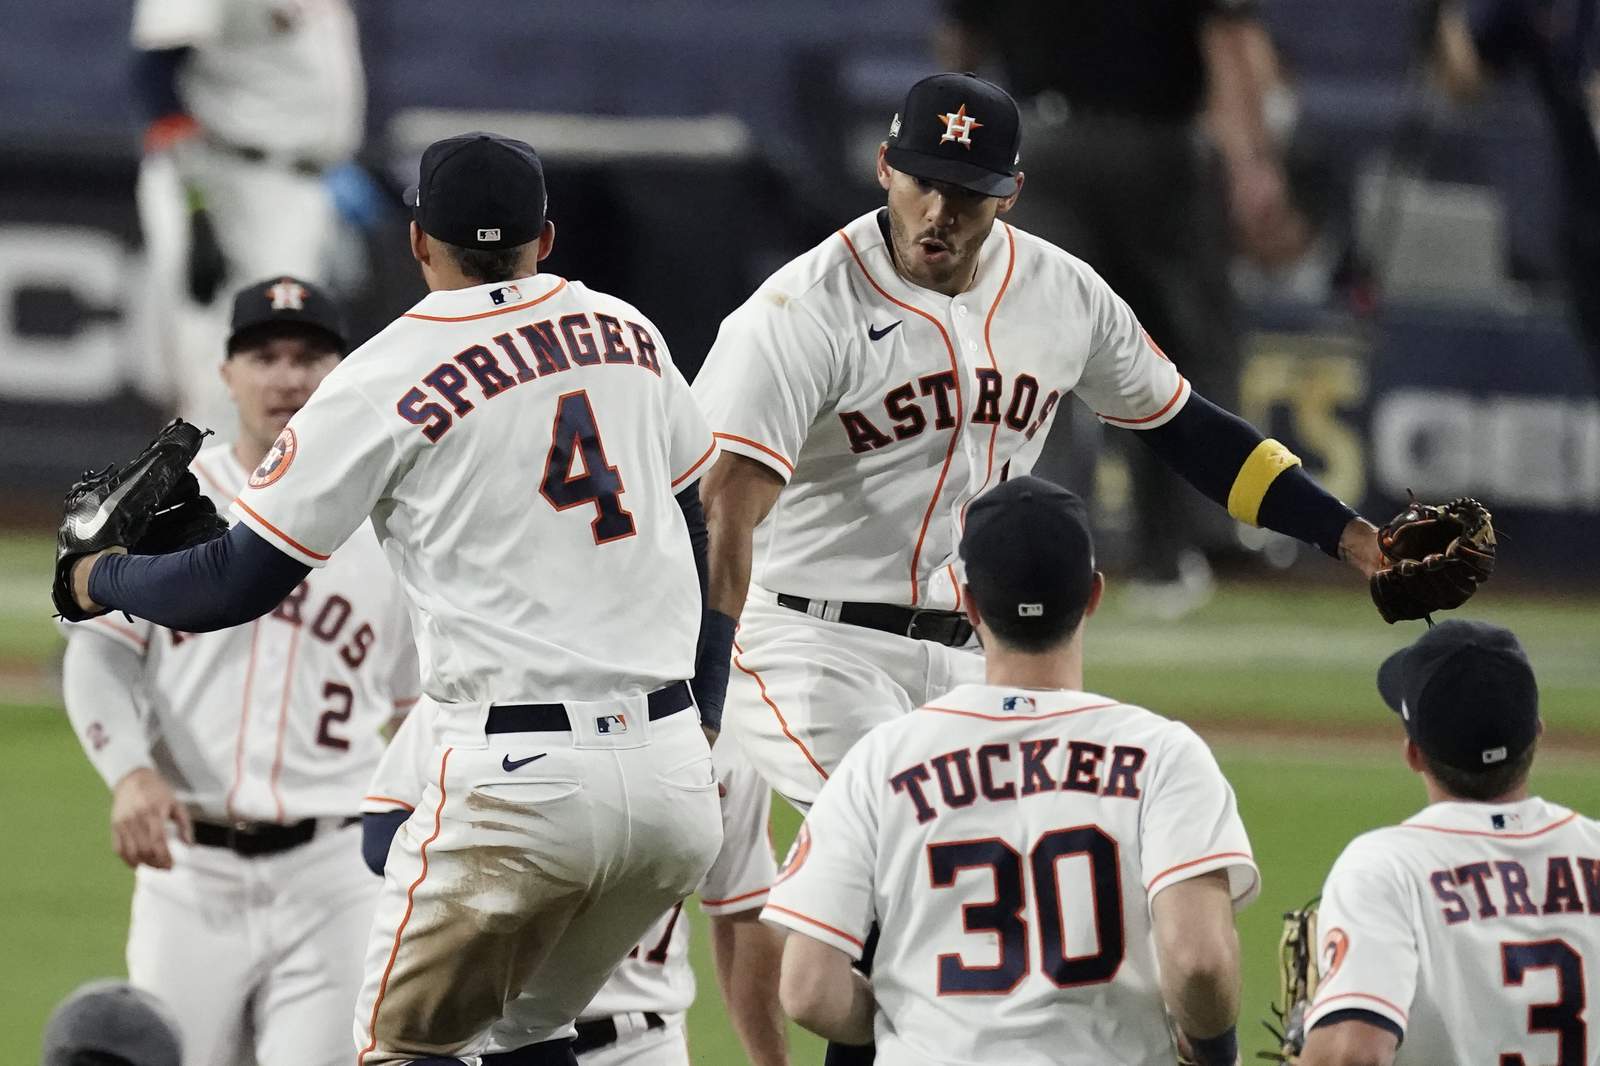 'The real Astros are gonna show up’: Fans ready for ALCS Game 5 after Game 4 win